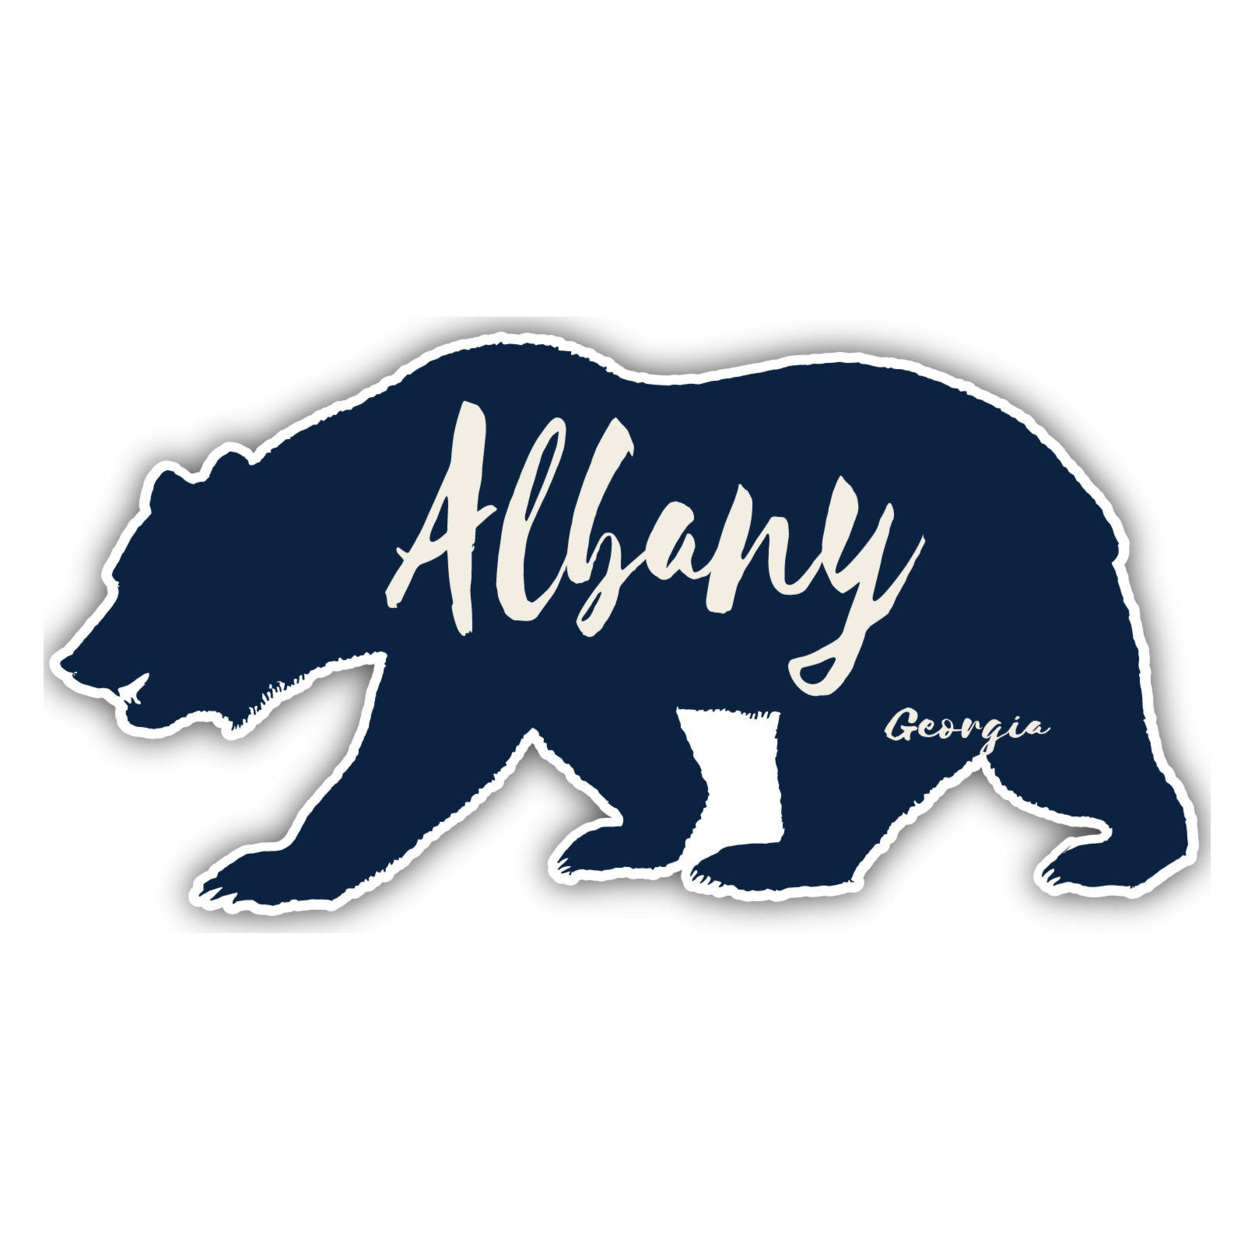 Albany Georgia Souvenir Decorative Stickers (Choose Theme And Size) - 4-Pack, 4-Inch, Tent